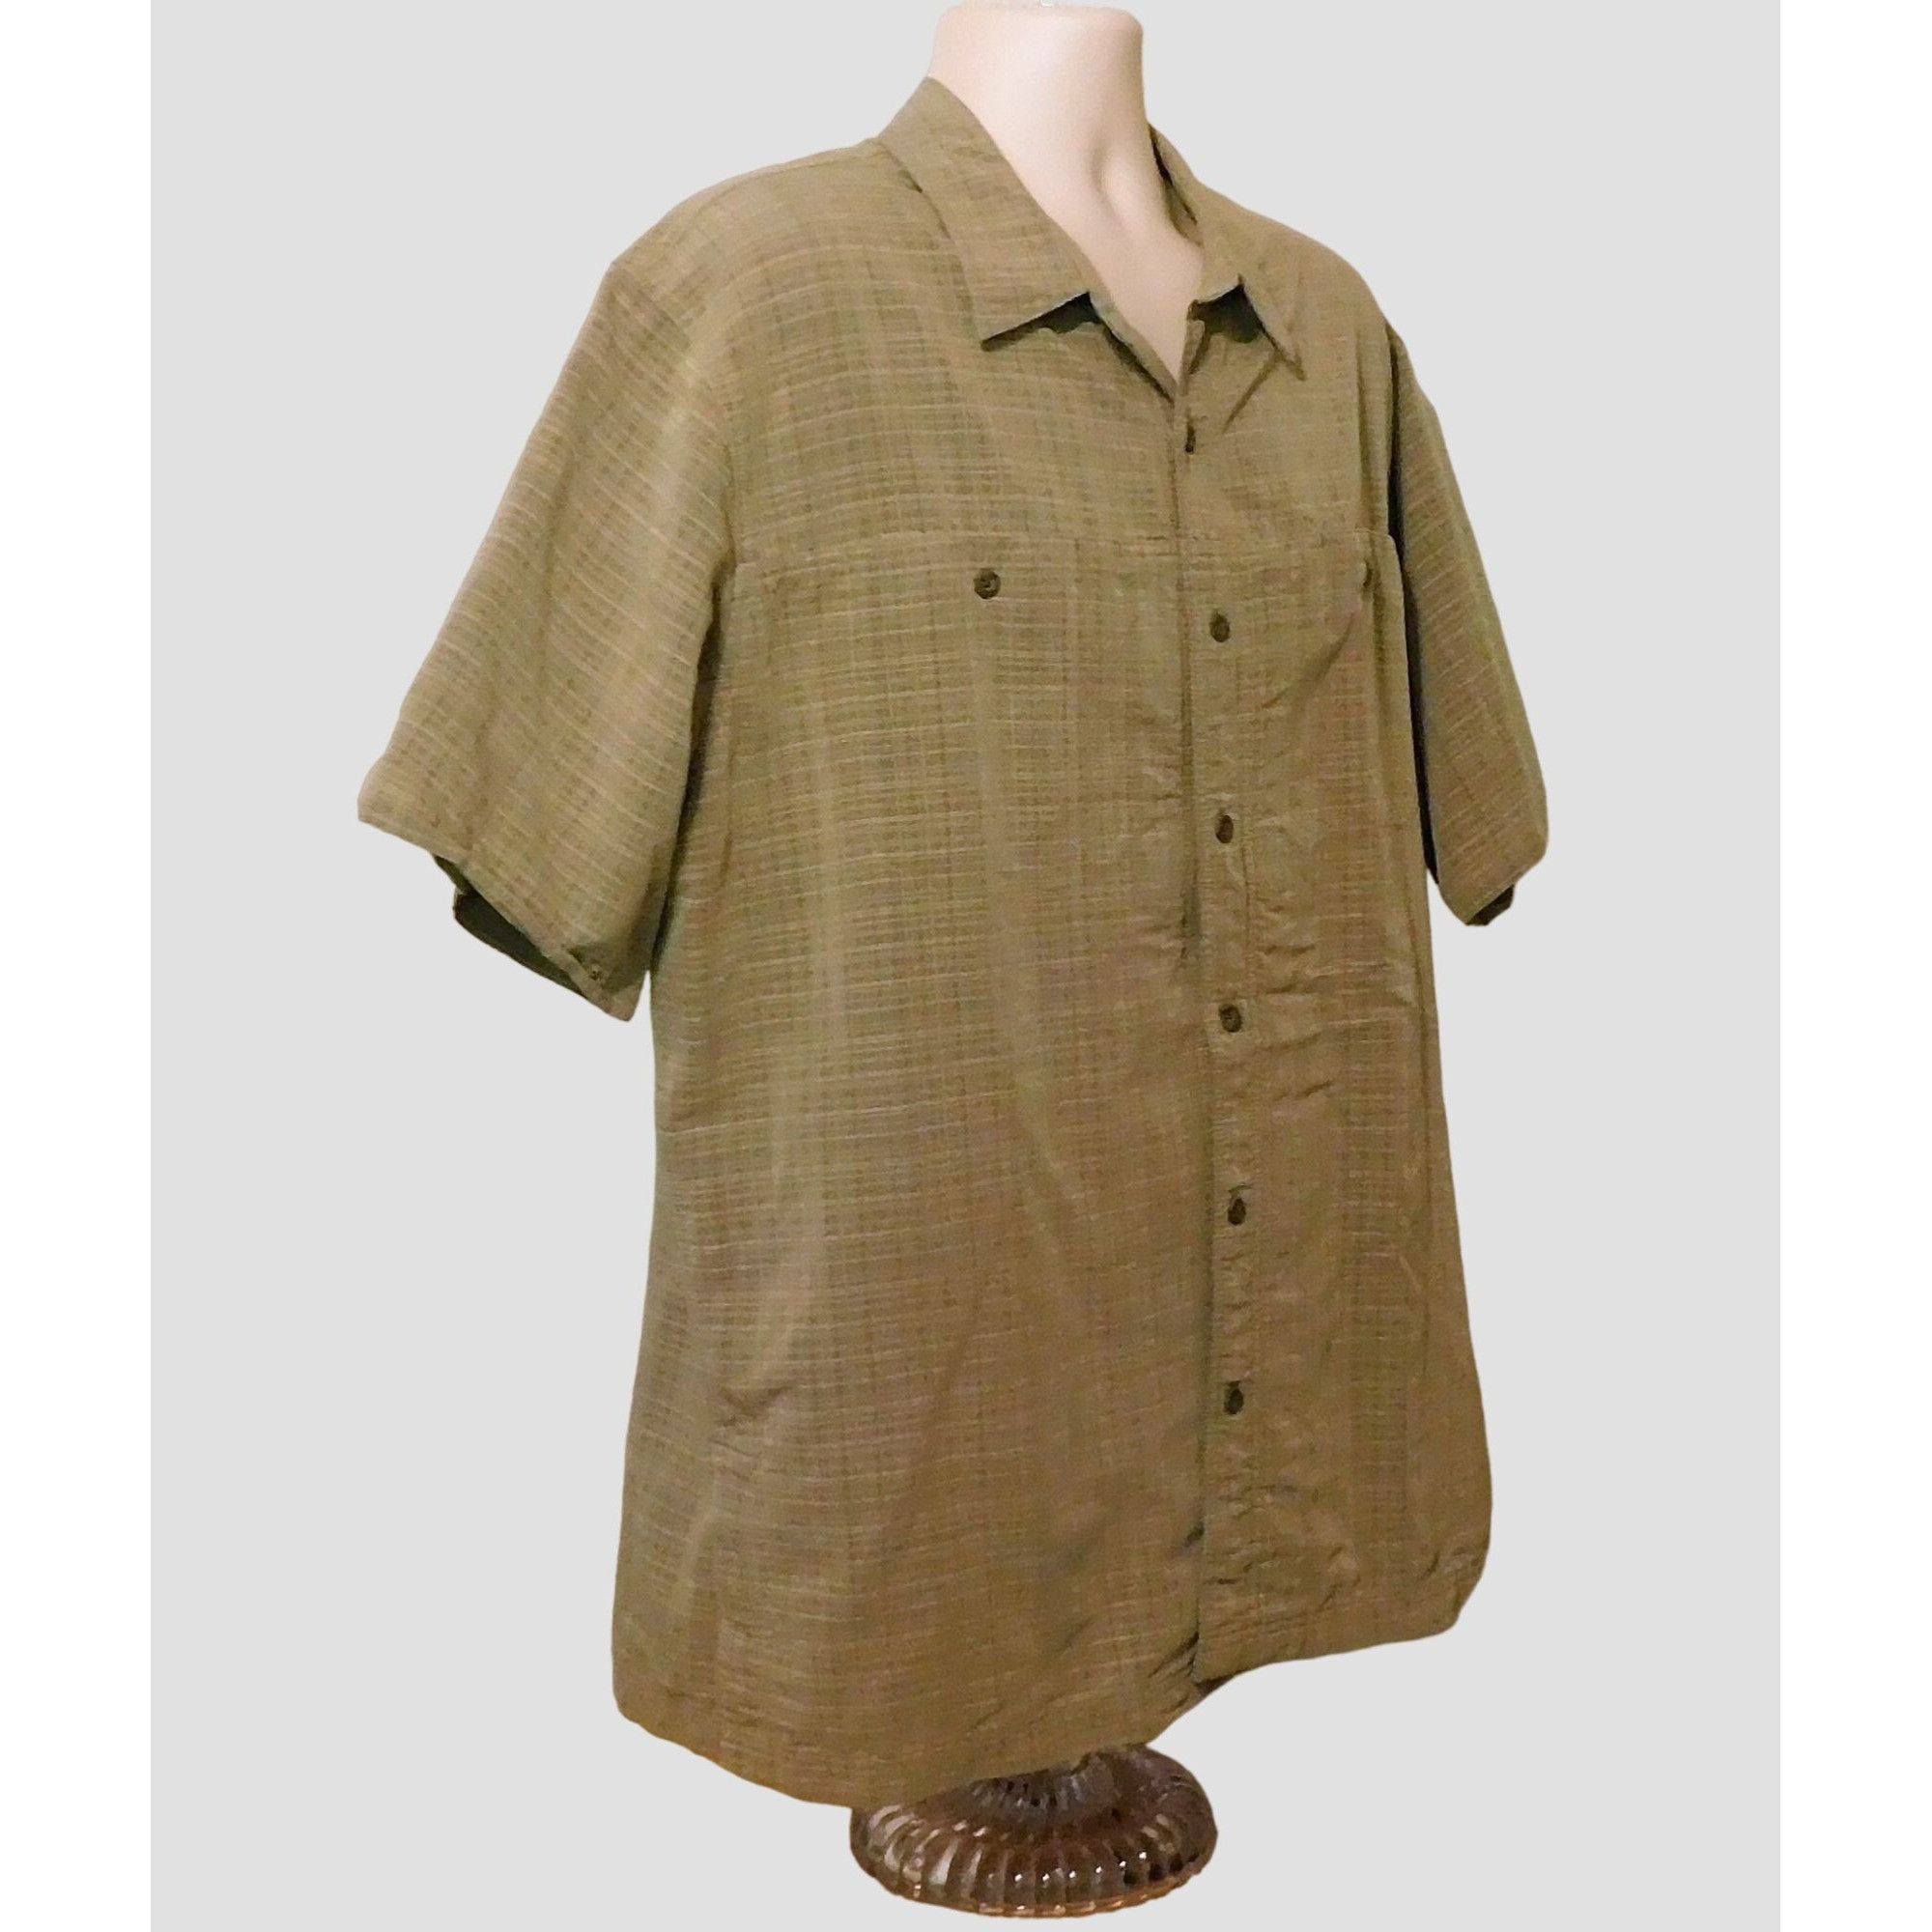 Other 5.11 Tactical Shirt XL Concealed Carry Green Plaid Short Slv Size US XL / EU 56 / 4 - 3 Thumbnail